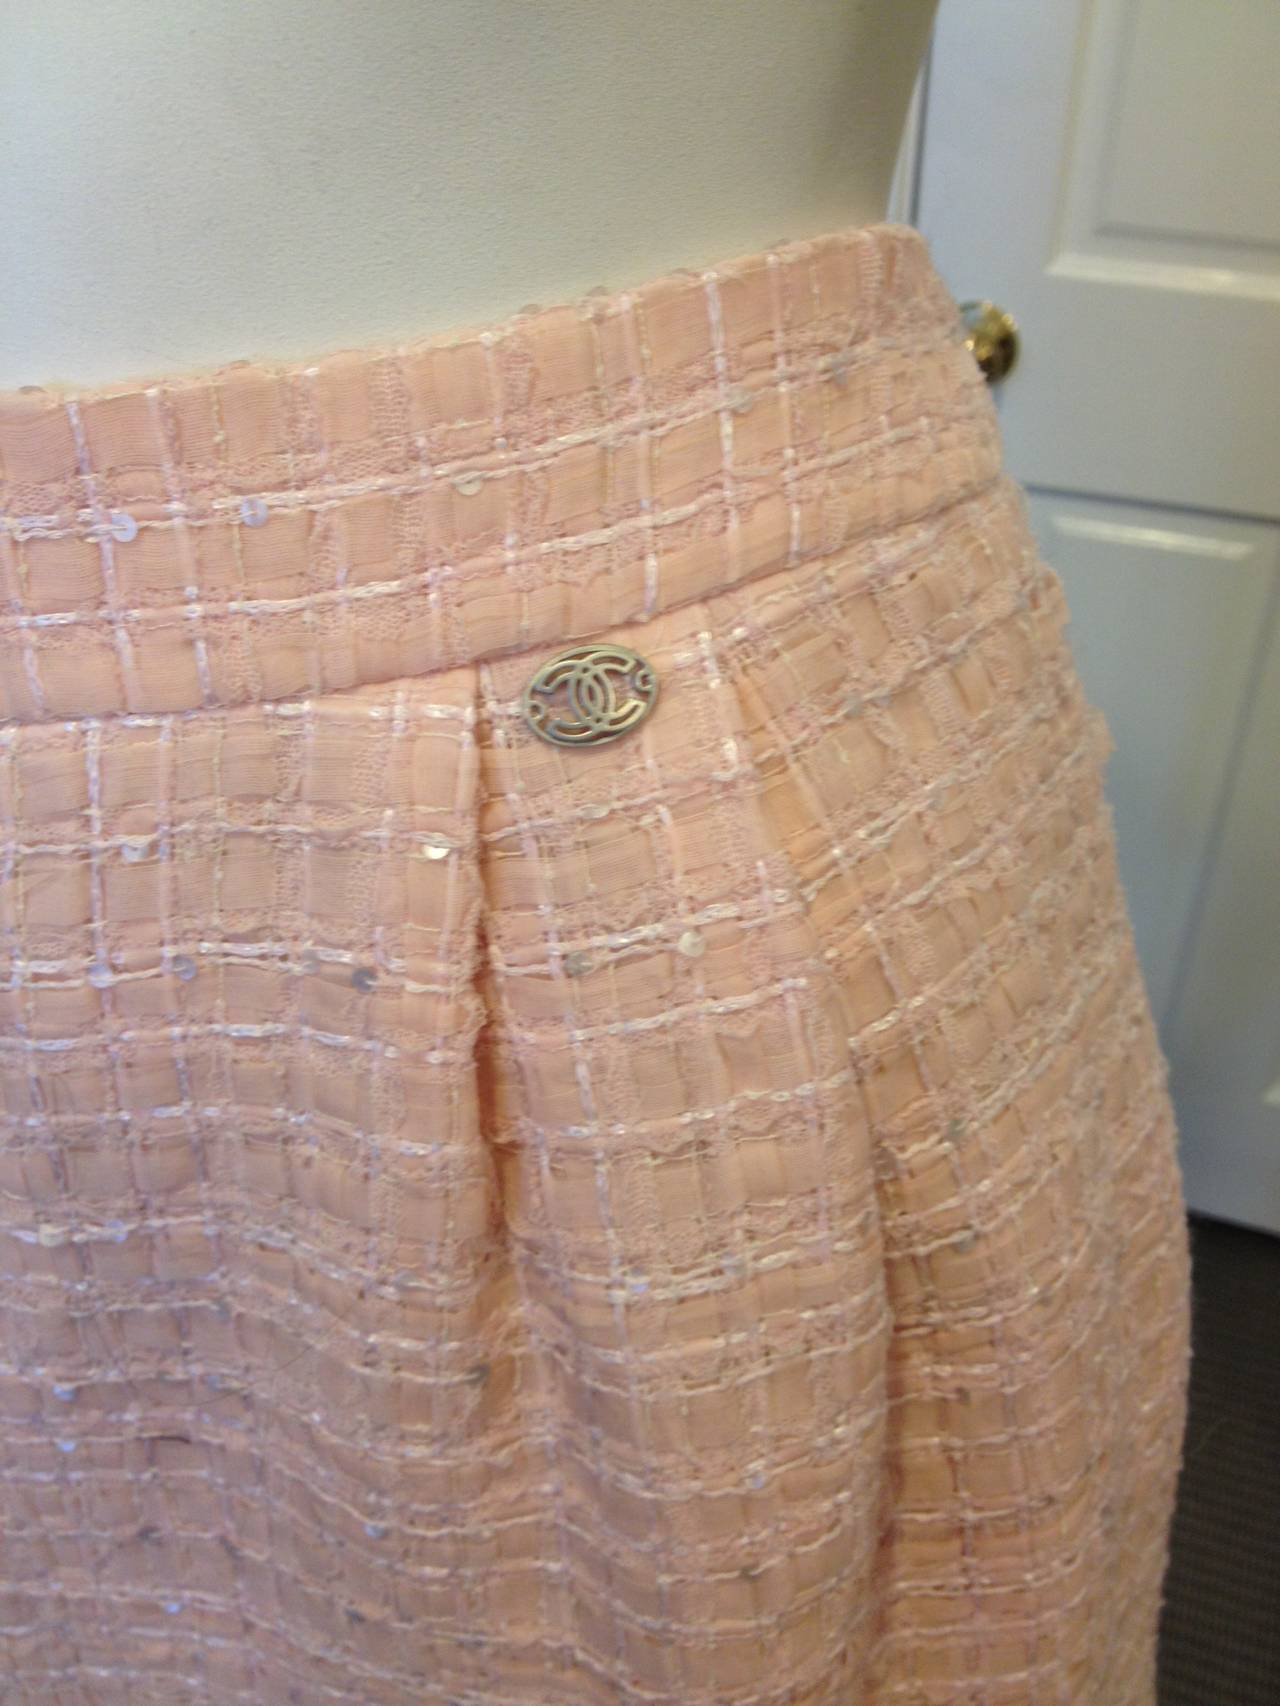 The perfect thing for someone sweet, feminine, and fashionable - this skirt in an ultra soft baby pink tweed is so Chanel. The little knife pleats at the hips add just a tiny flare from the high waistband, while the hem is trimmed with a band of